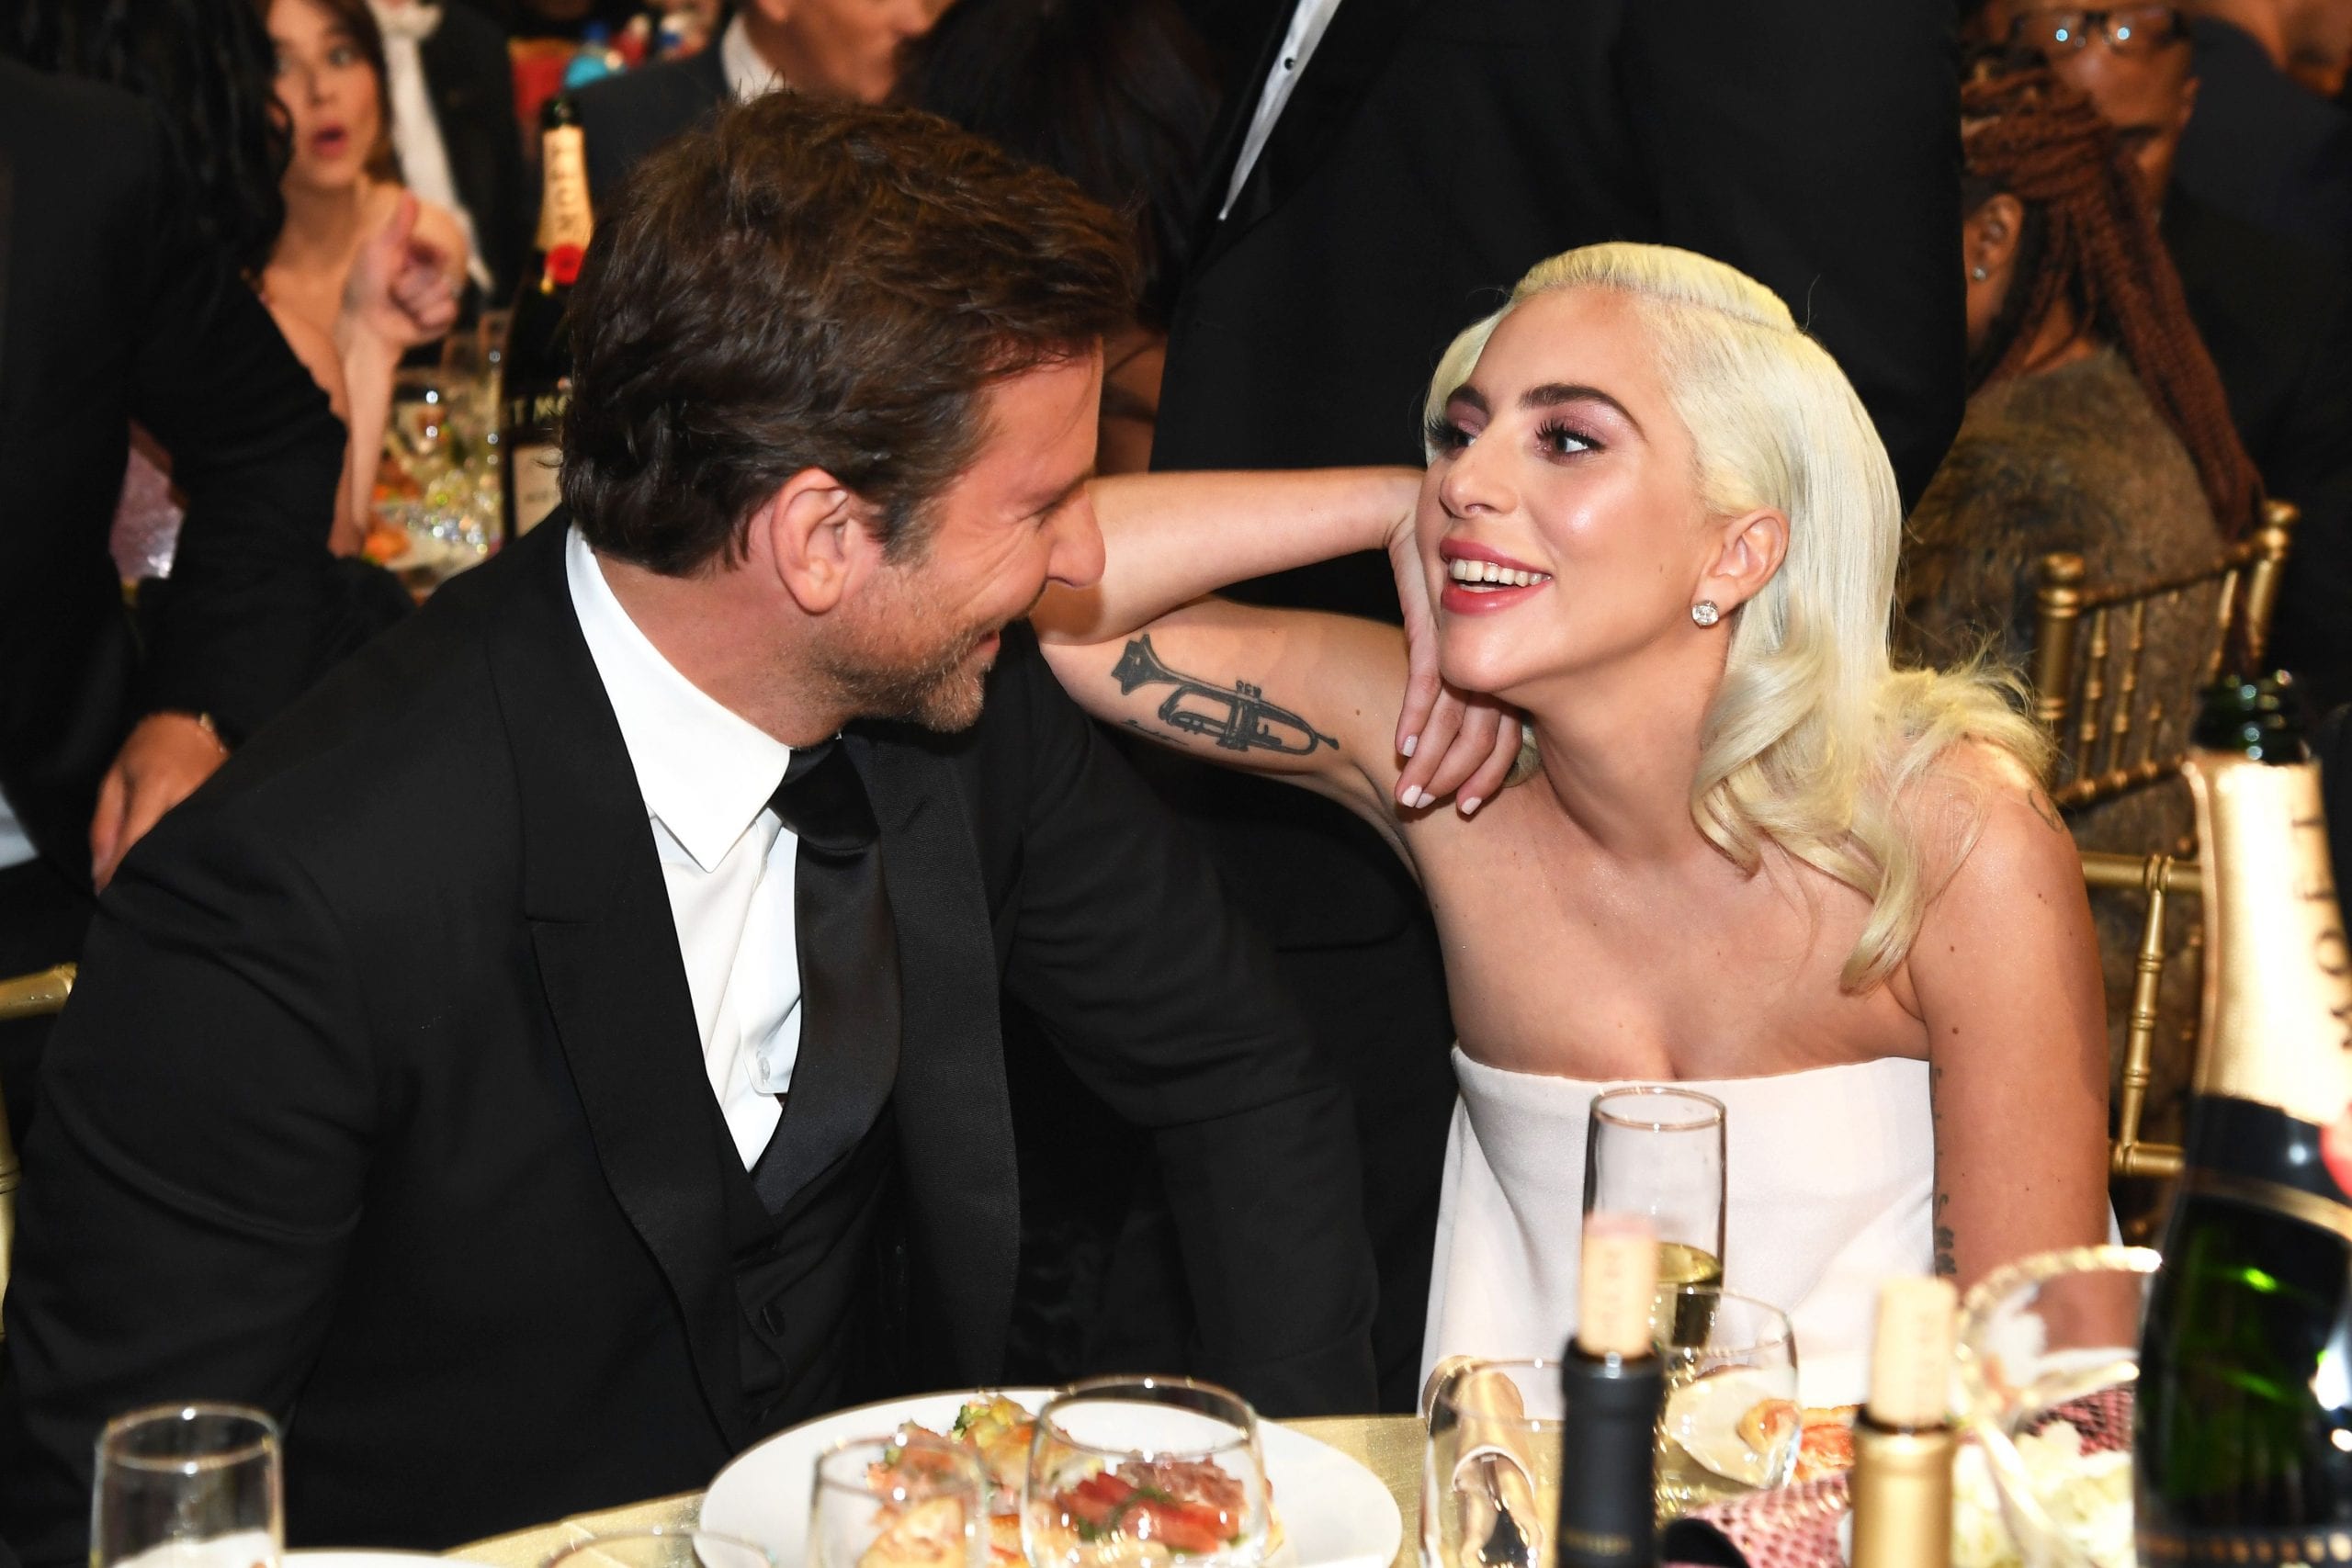 Is lady now who gaga dating Who's Lady